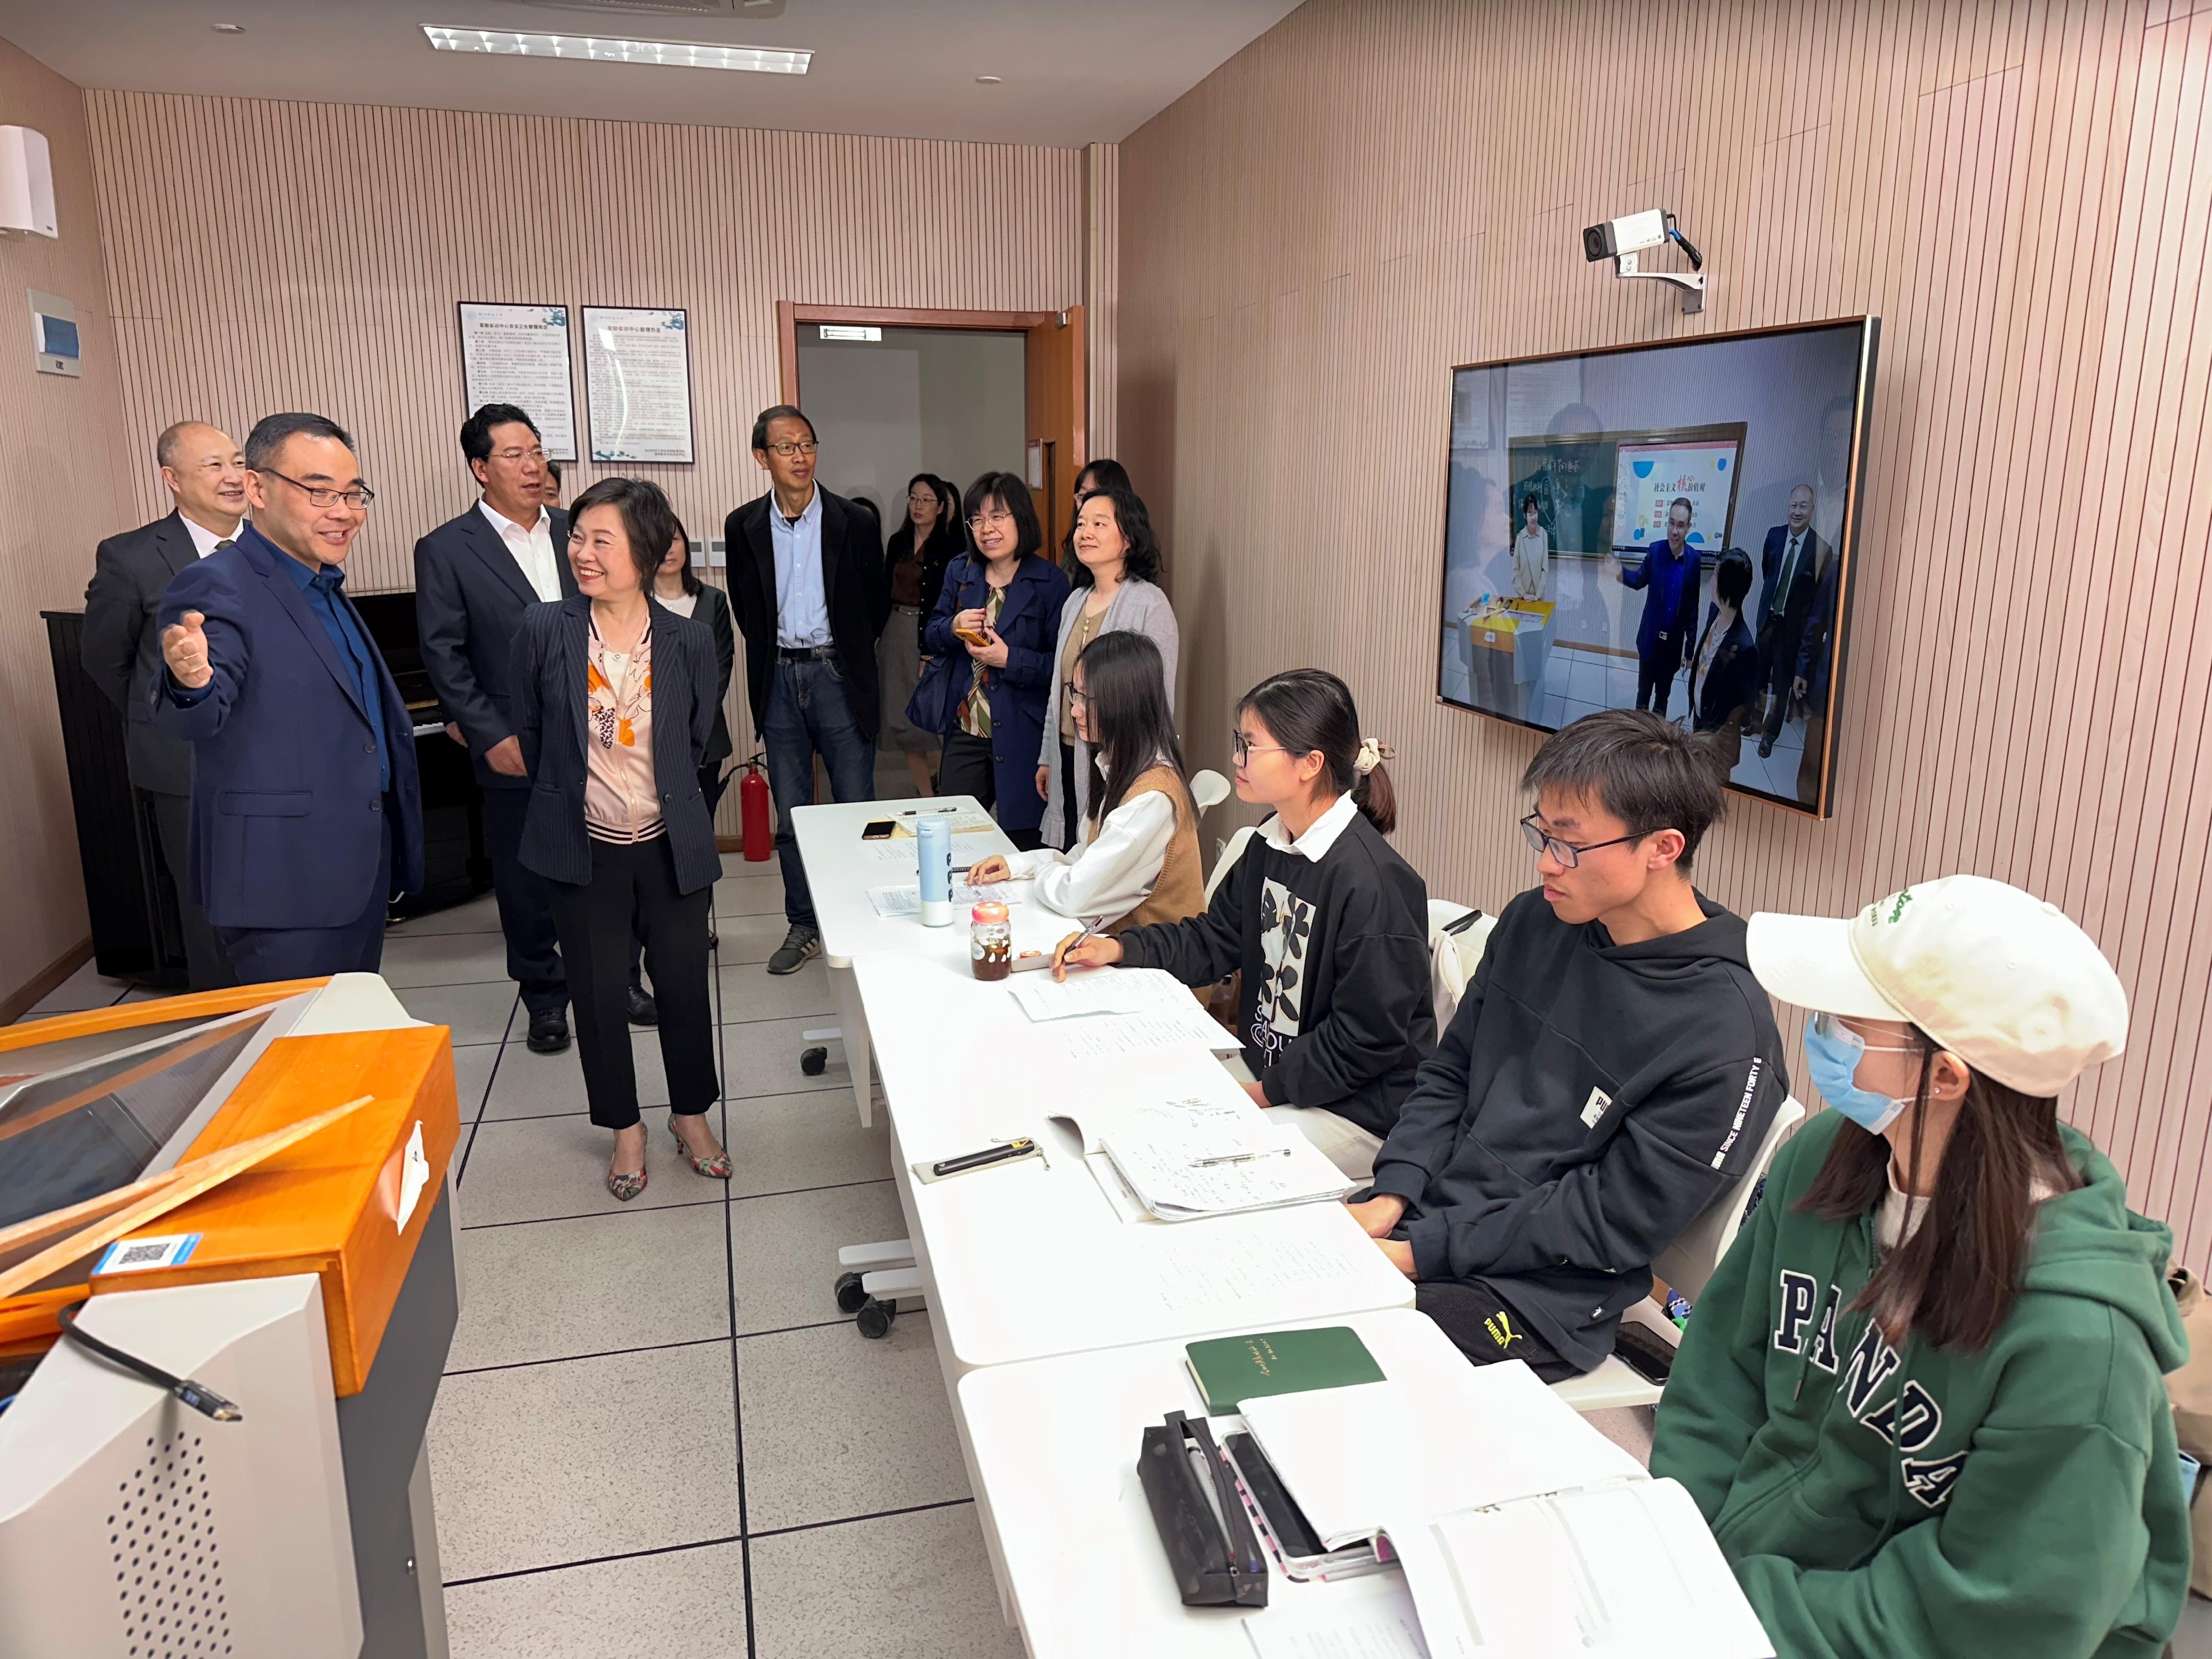 The Secretary for Education, Dr Choi Yuk-lin, today (April 11) visited the Teacher Education Experimental Training Centre of Hangzhou Normal University. Photo shows Dr Choi (front row, second left) listening to a briefing by a representative of the university on the operation of the centre.